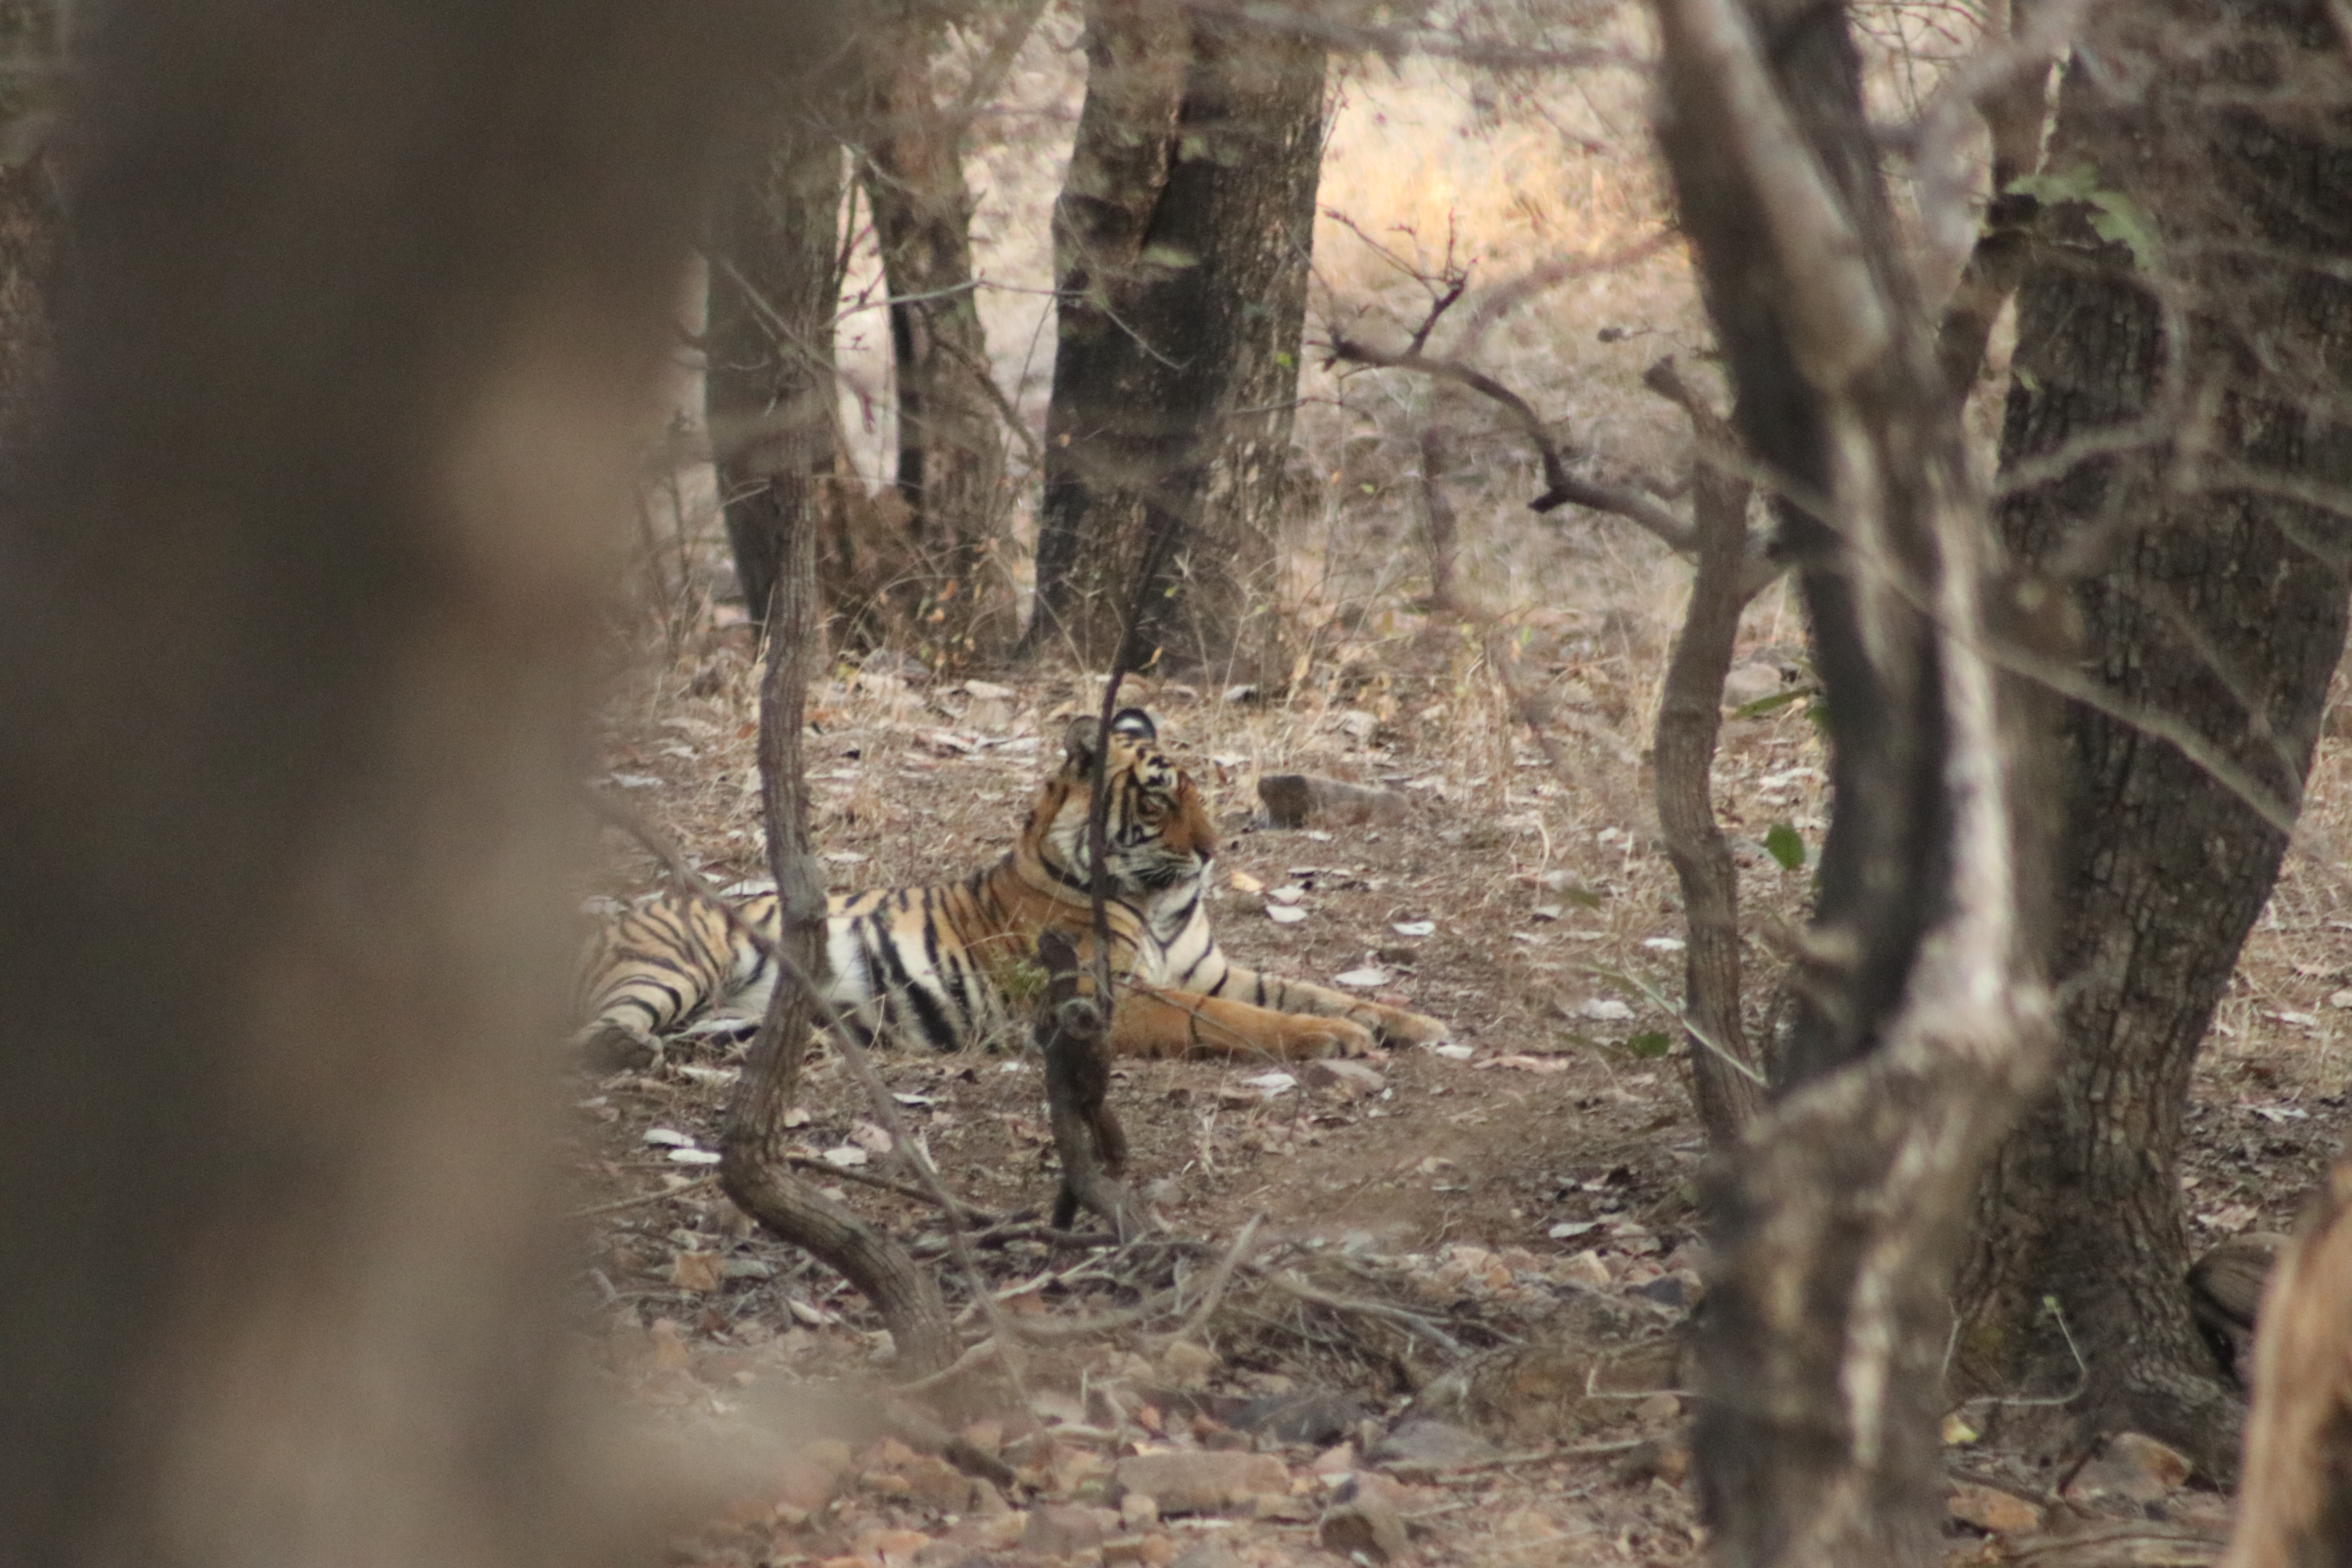 The King of Ranthambore